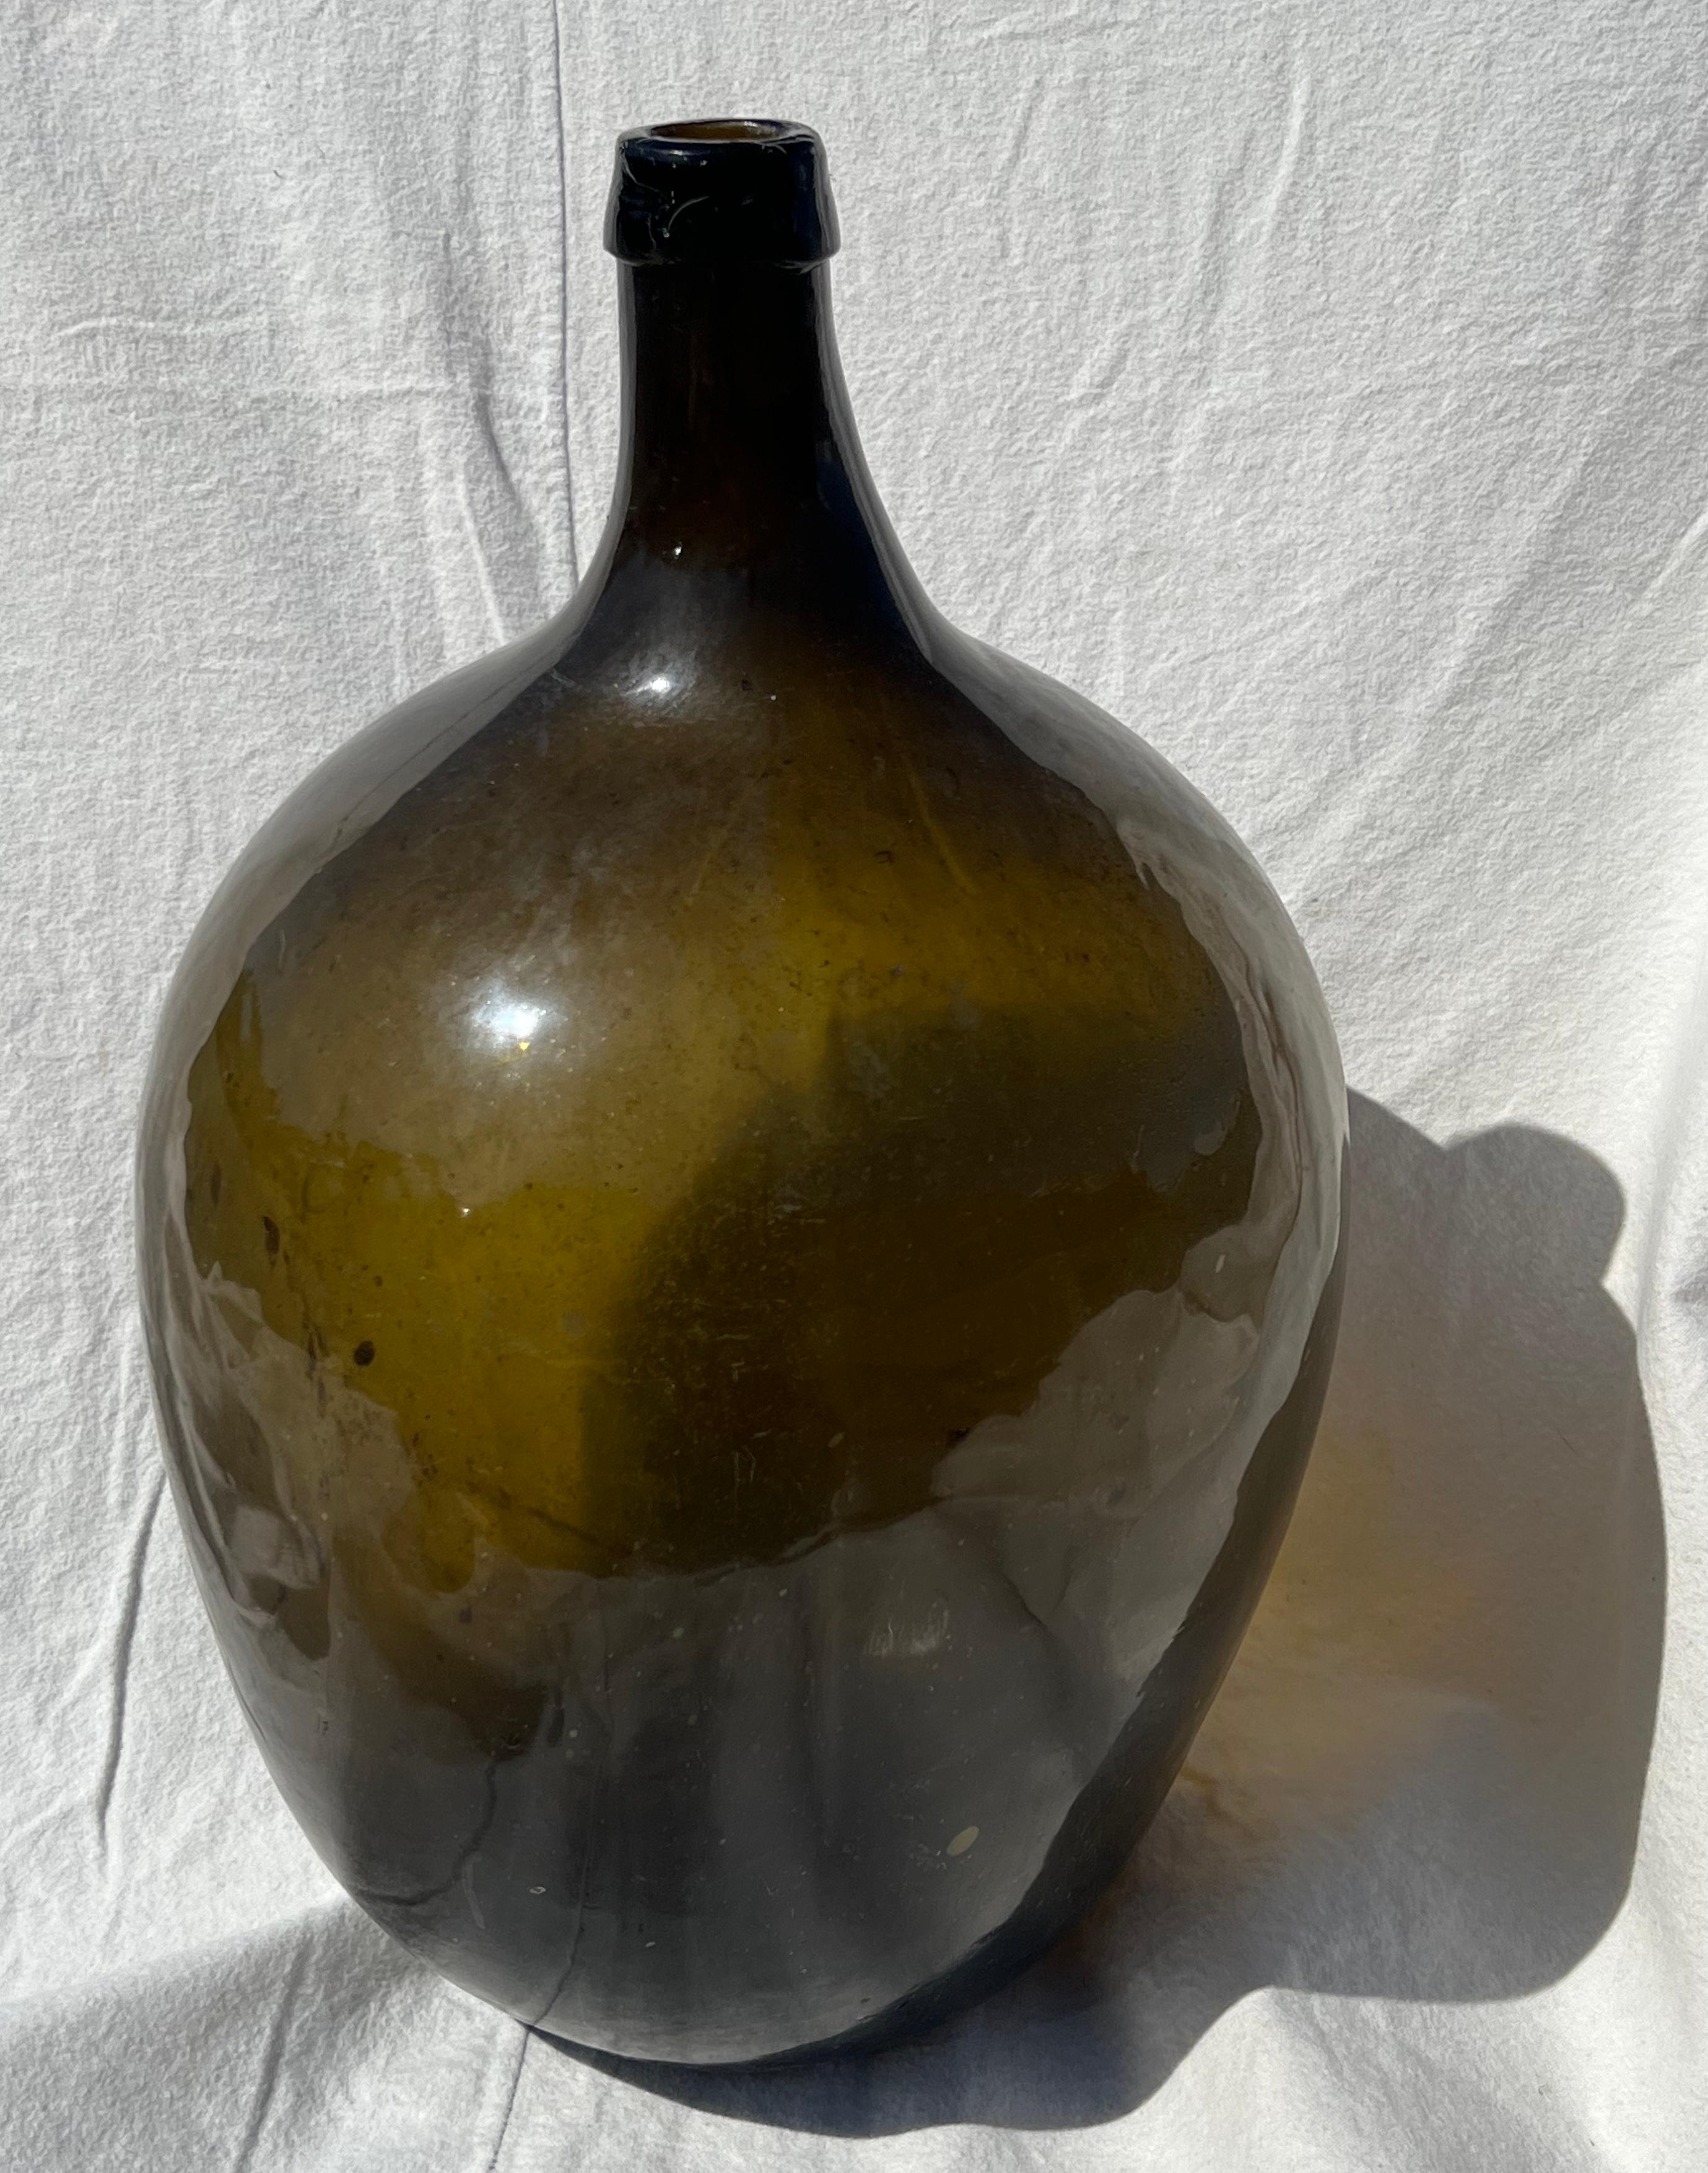 19th century green glass demijohn bottle in excellent condition.